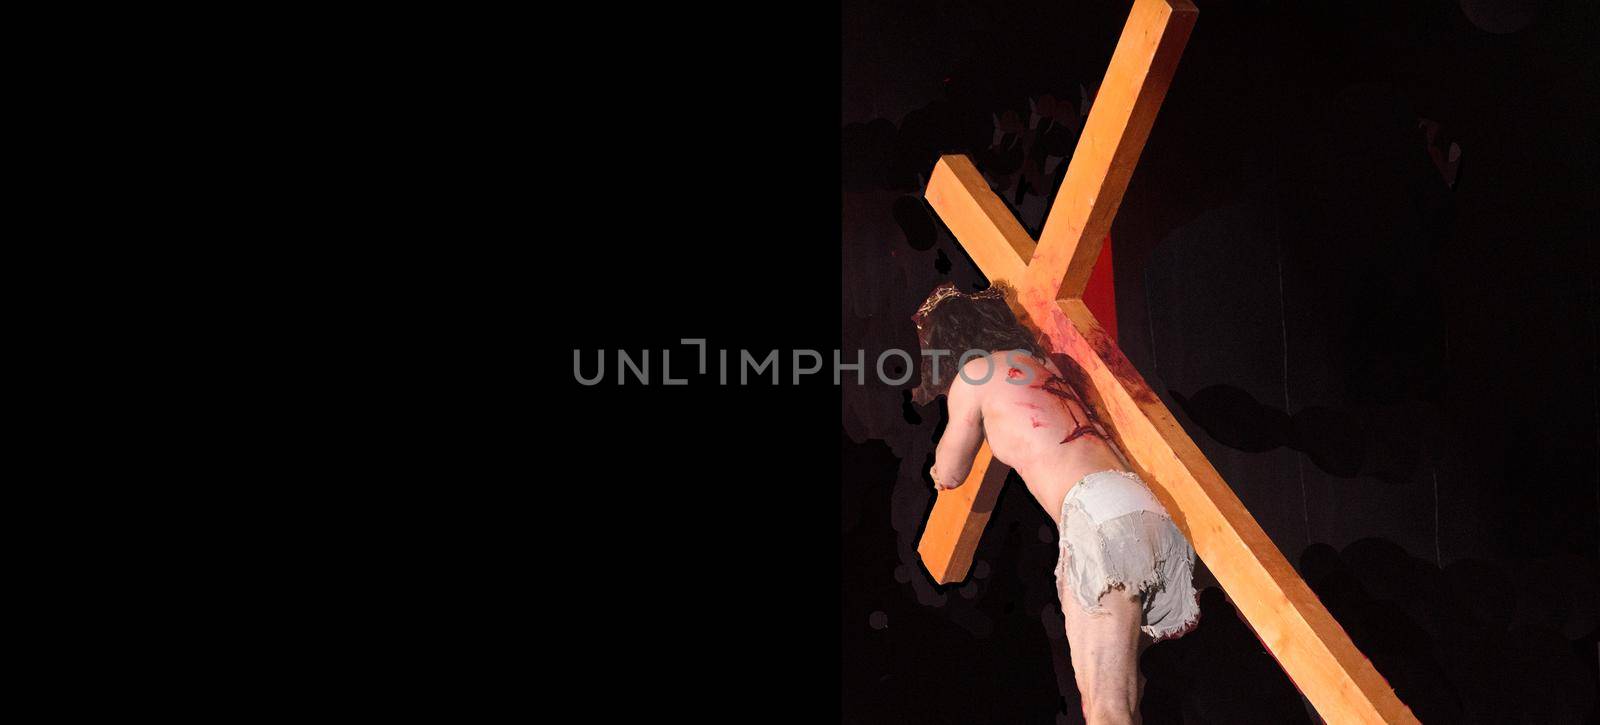 Jesus carrying the Cross into the darkness. by andre_dechapelle